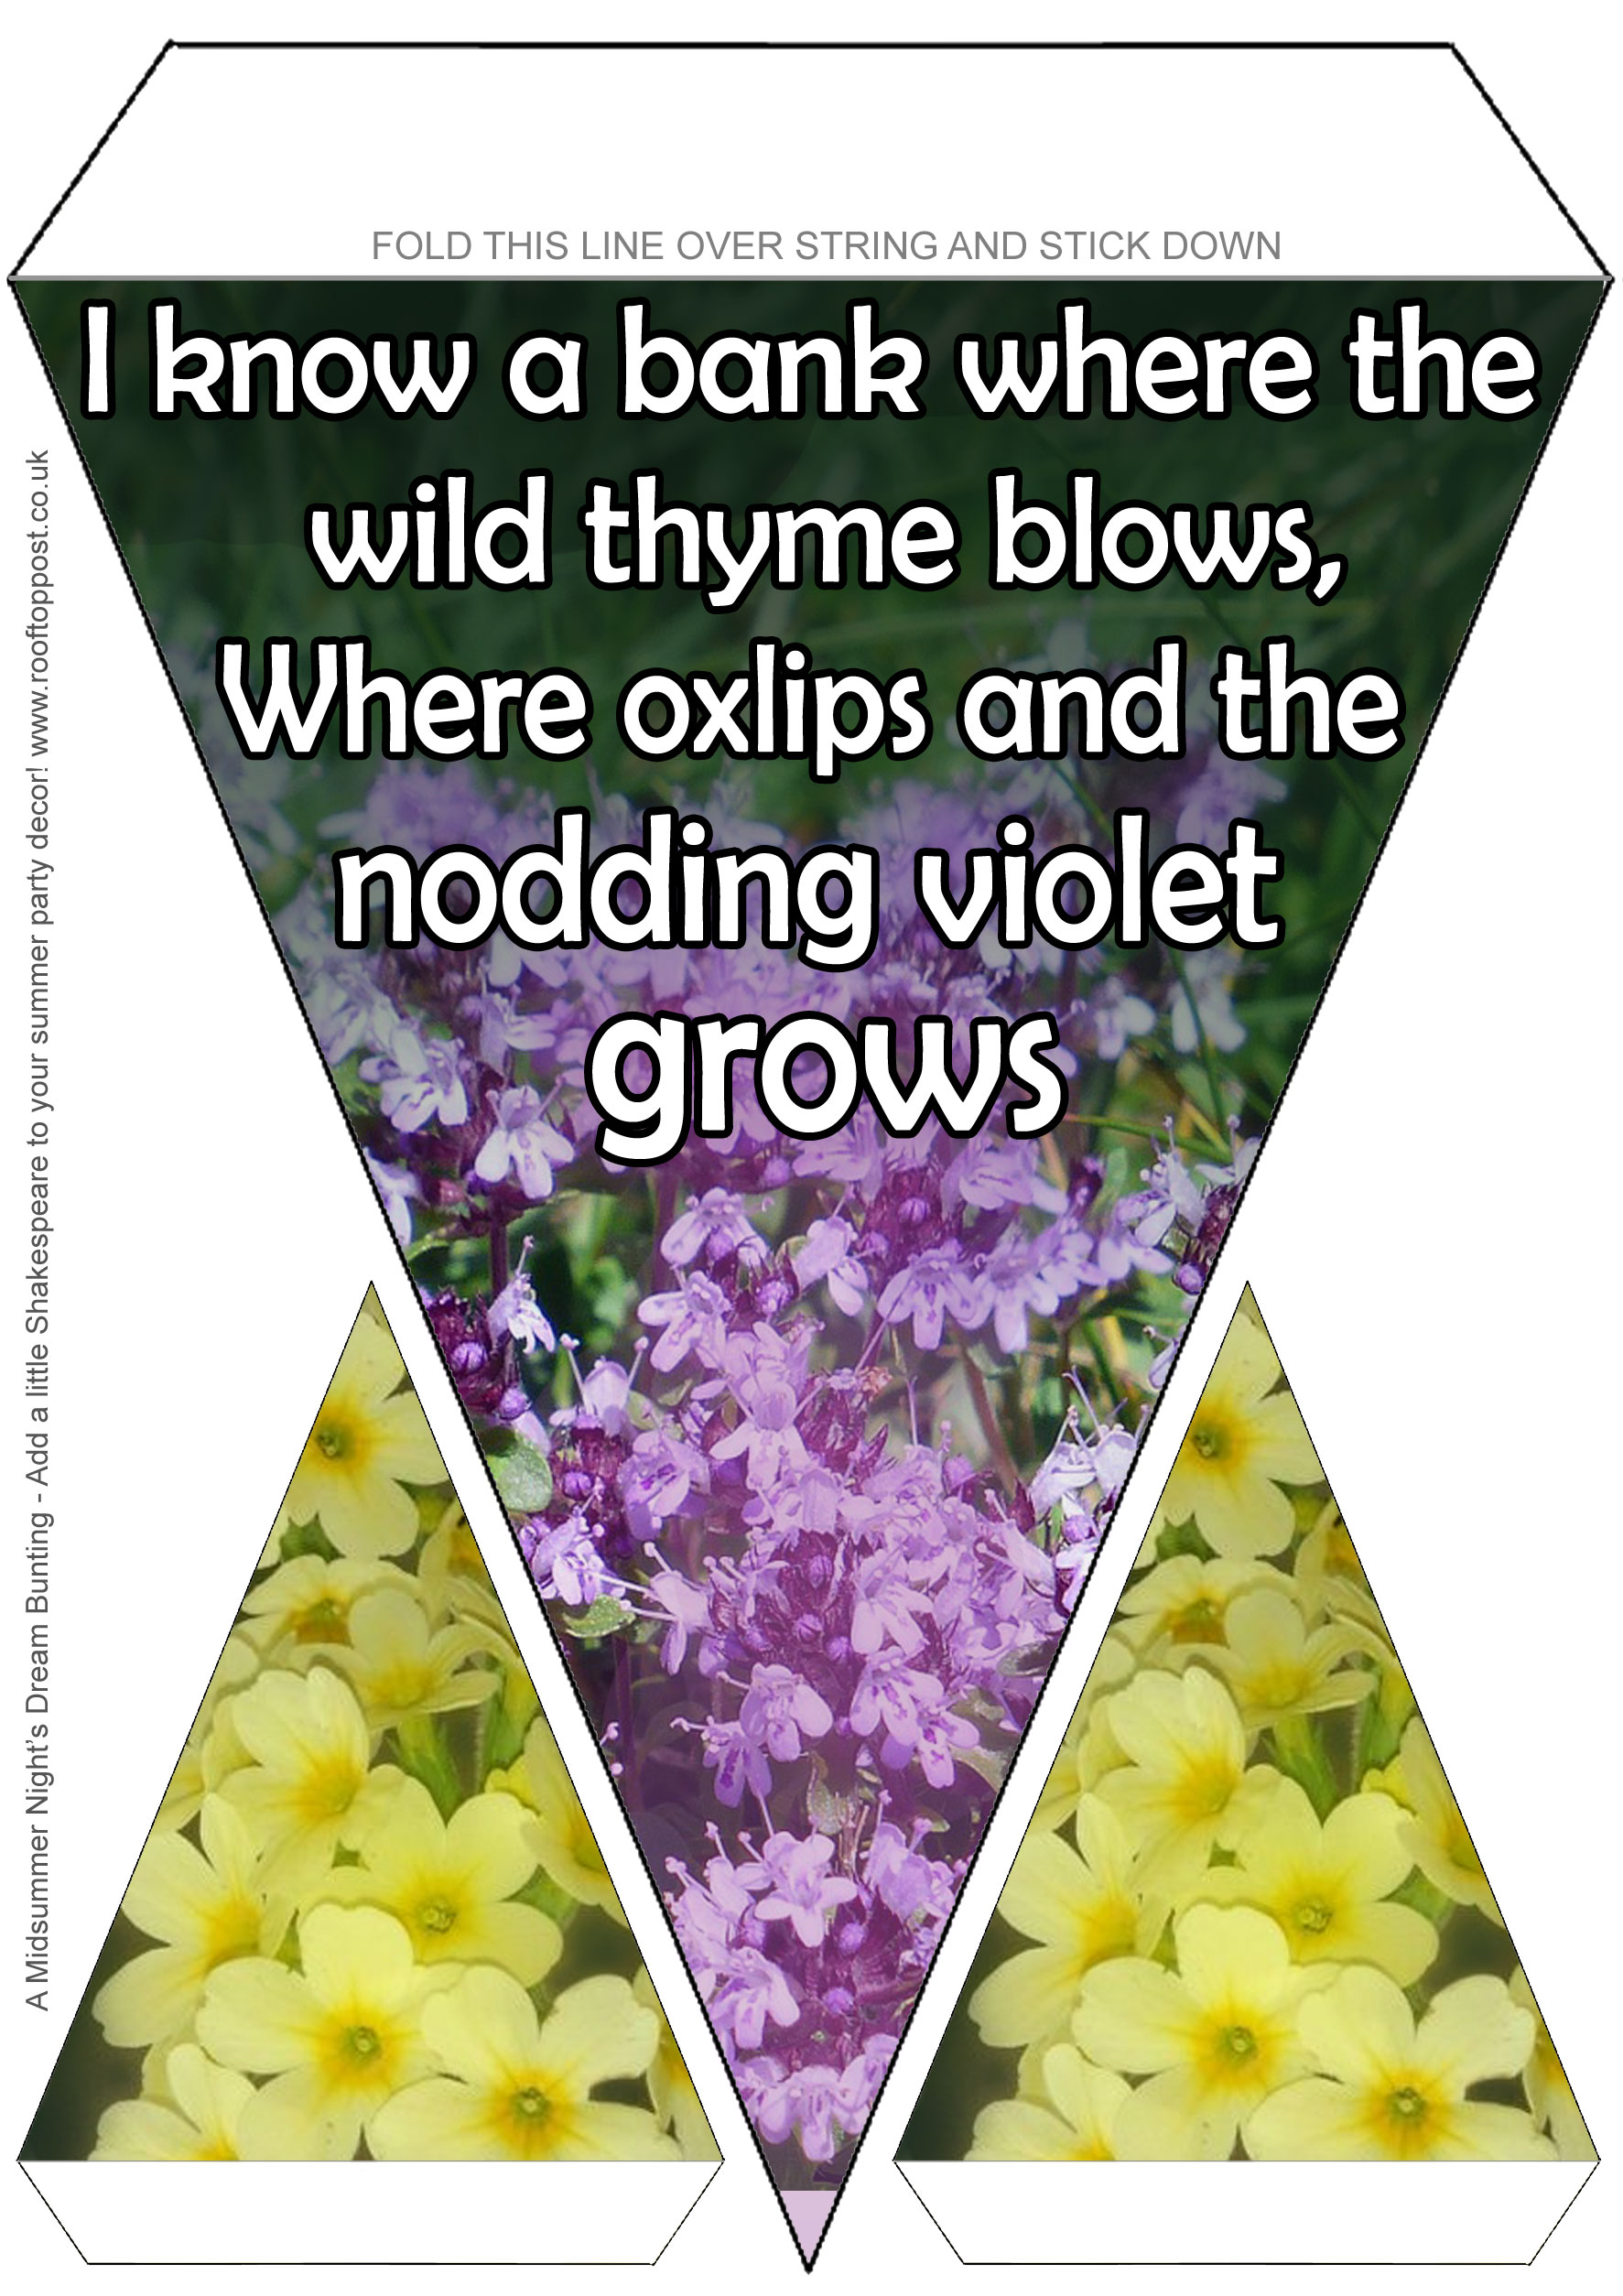 Printable midsummer party decorative bunting with quotations from Shakespeare's A Midsummer Night's Dream. The lines cited are: I know a bank where the wild thyme blows, Where oxlips and the nodding violet grows